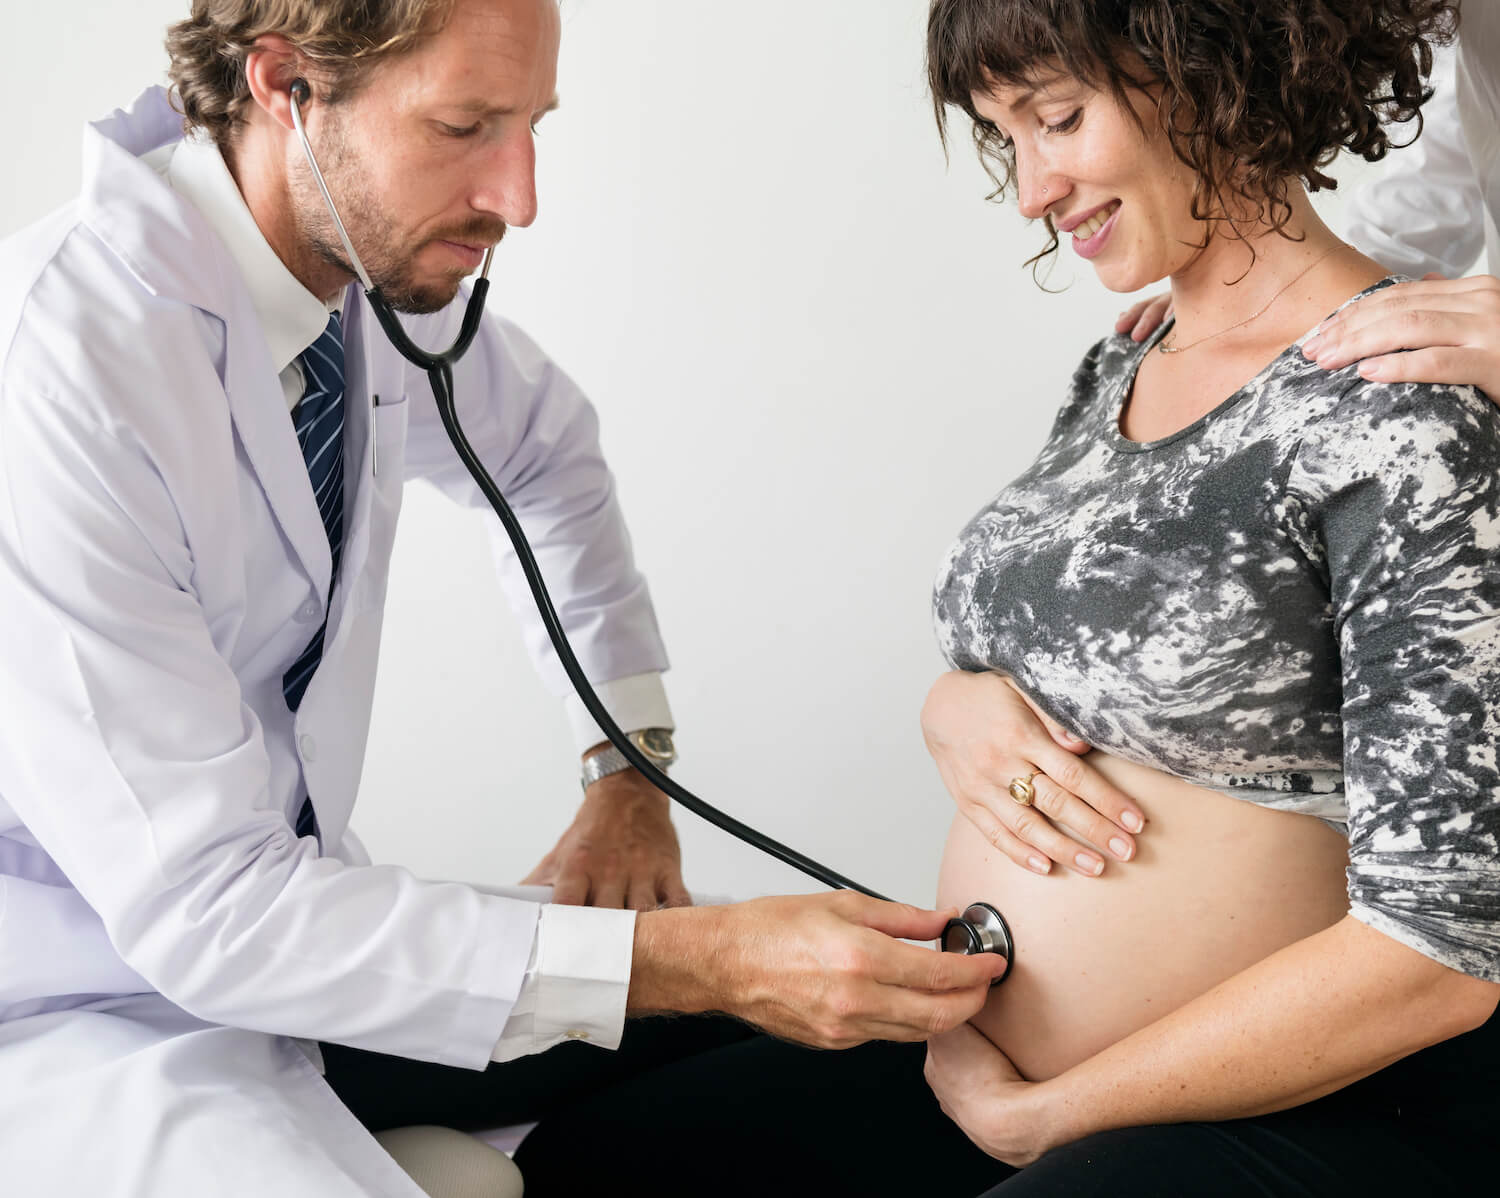 how much is first prenatal visit